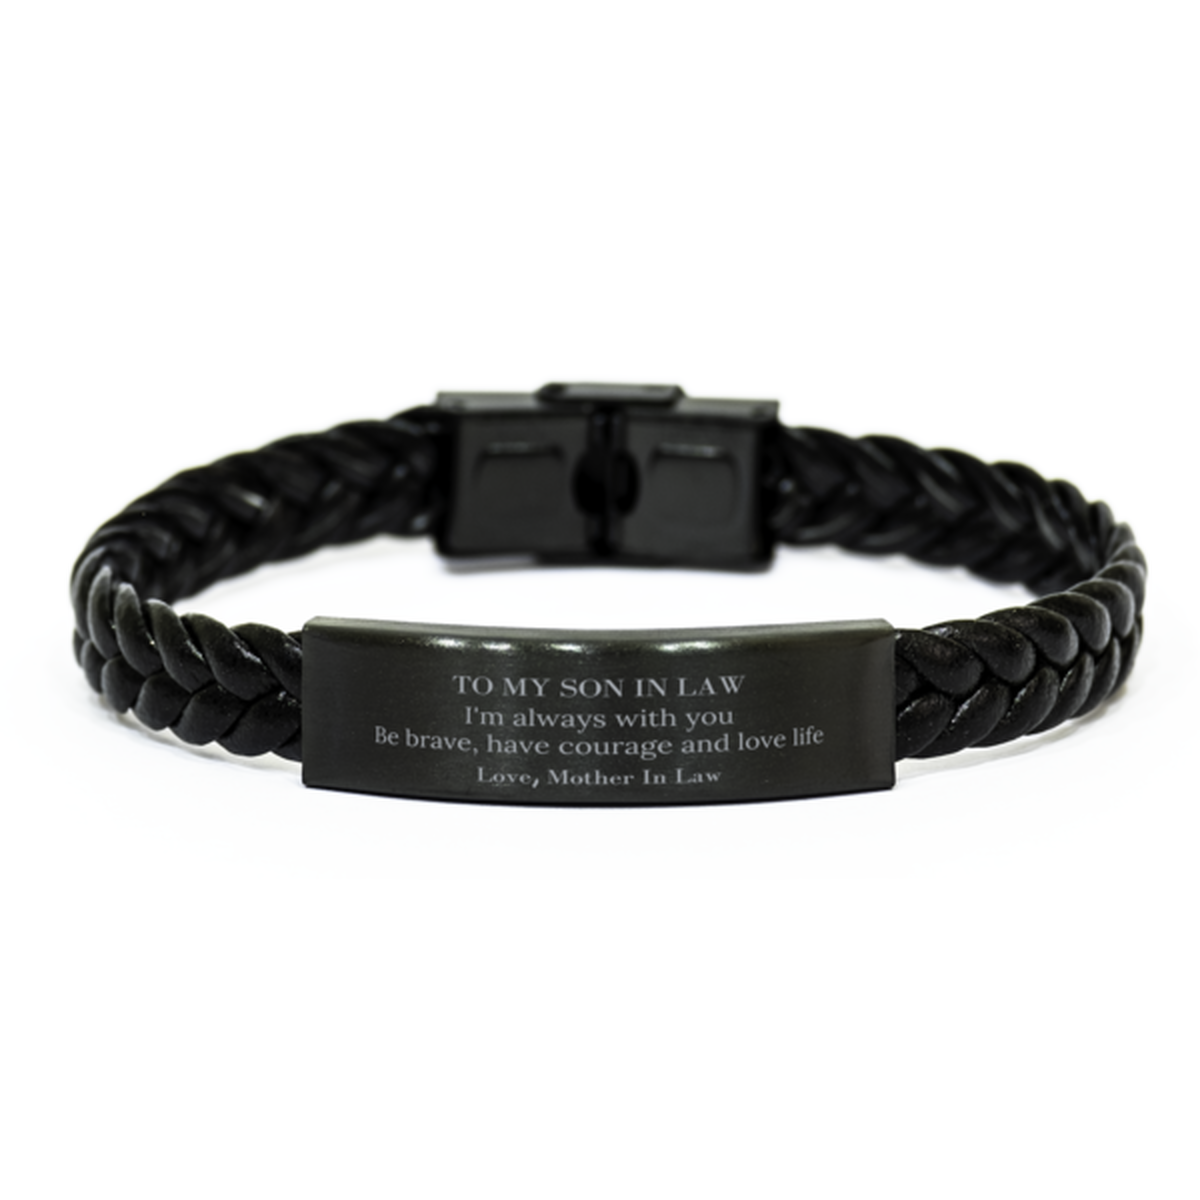 To My Son In Law Gifts from Mother In Law, Unique Braided Leather Bracelet Inspirational Christmas Birthday Graduation Gifts for Son In Law I'm always with you. Be brave, have courage and love life. Love, Mother In Law